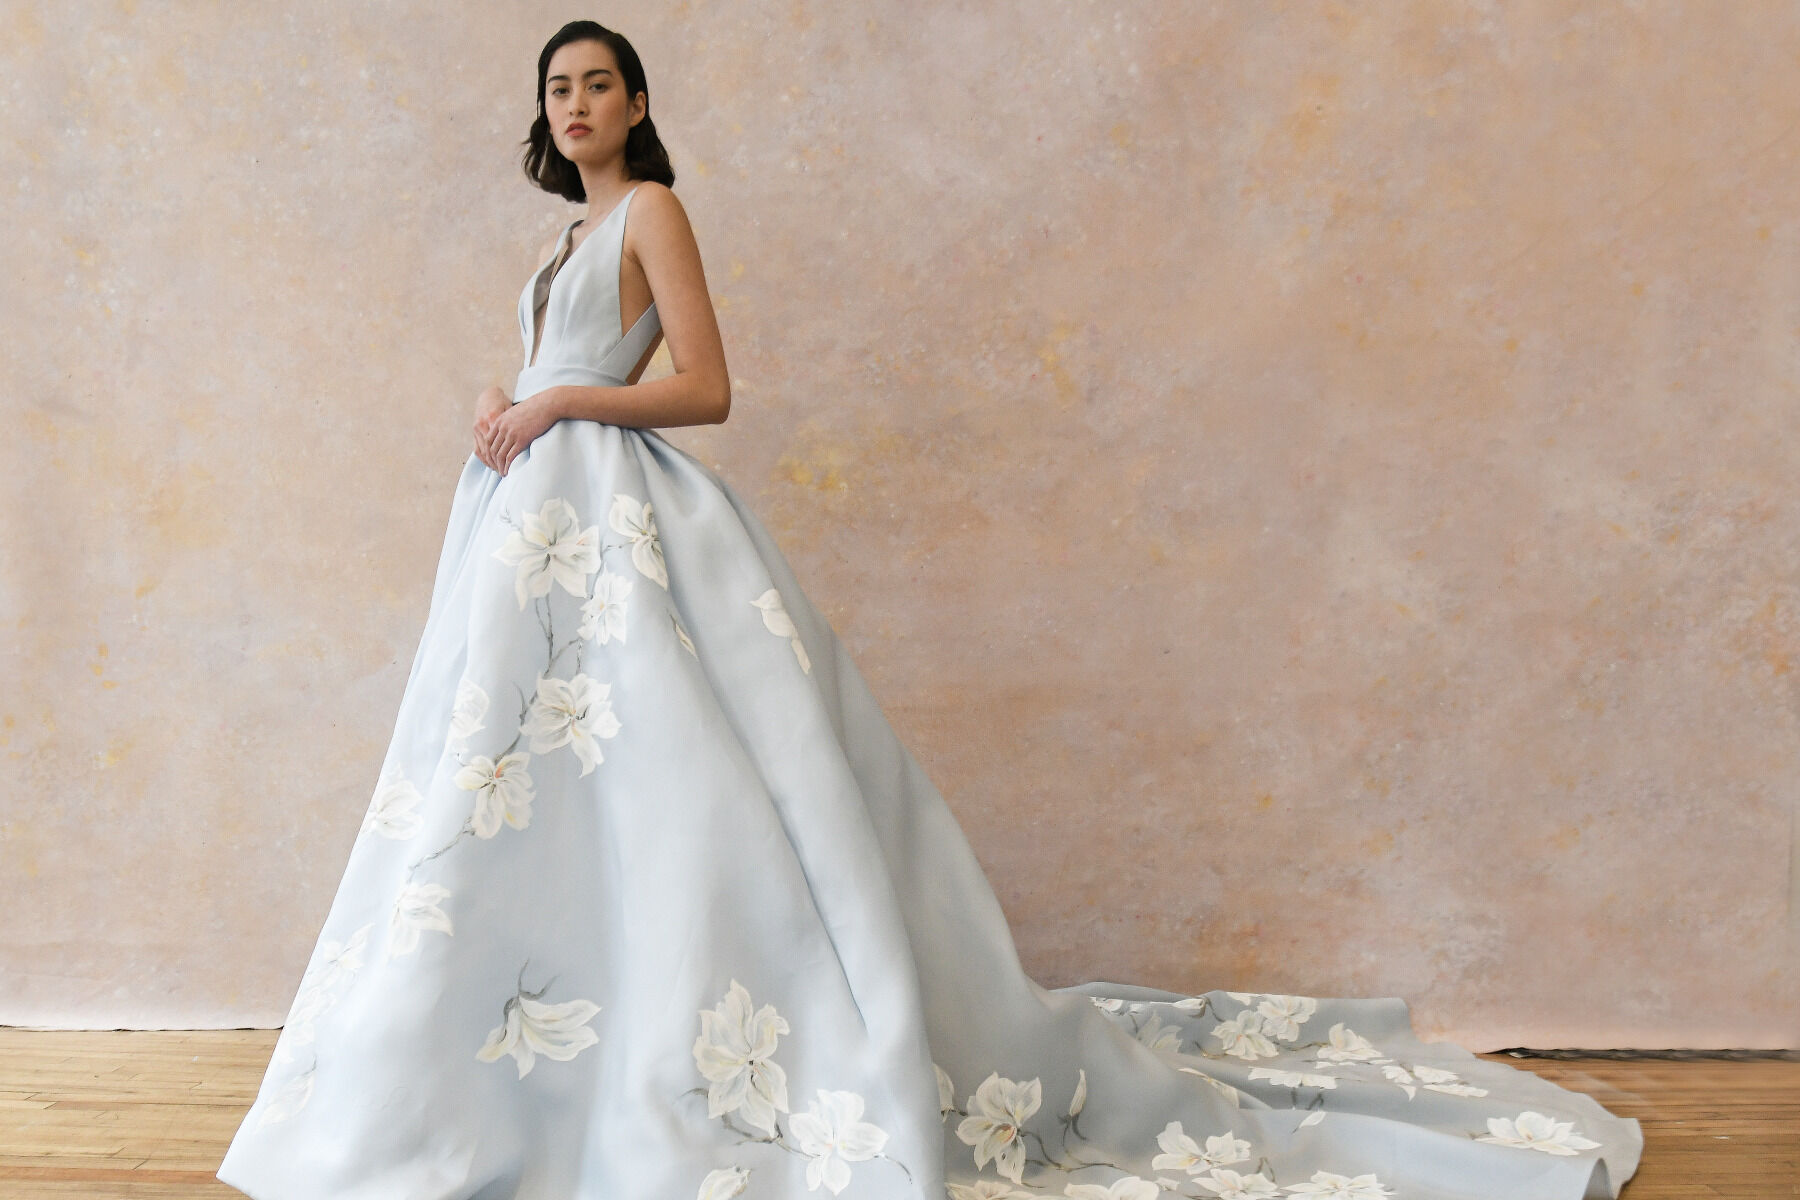 Say hello to your dream wedding dress from Mak Tumang featuring a classic  silhouette and beautiful lavish detailing  Popular wedding dresses  Stunning wedding dresses Wedding dresses